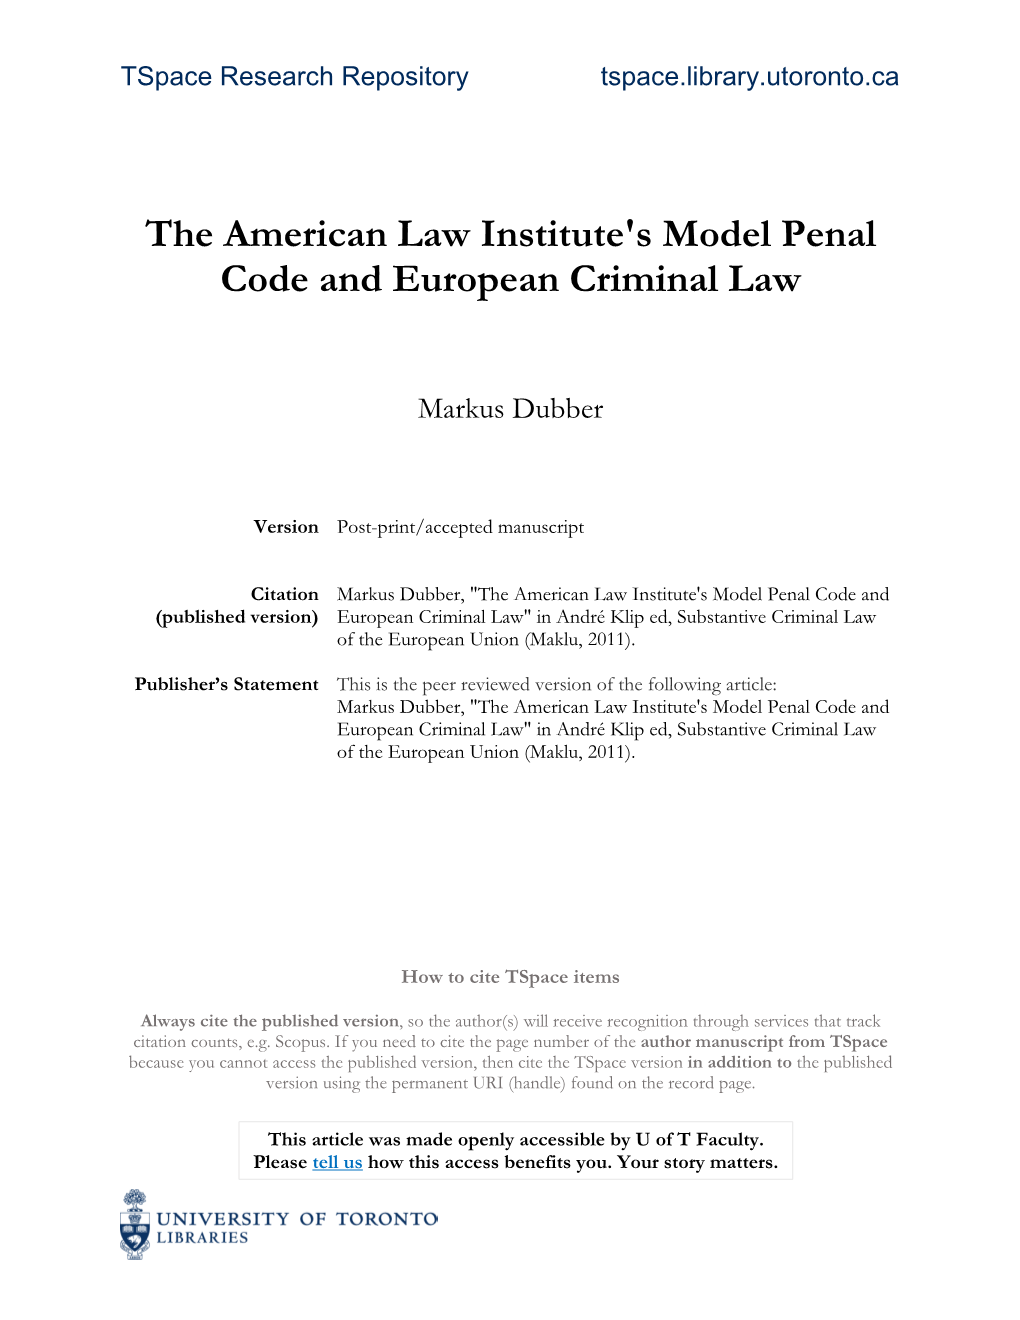 The American Law Institute's Model Penal Code and European Criminal Law